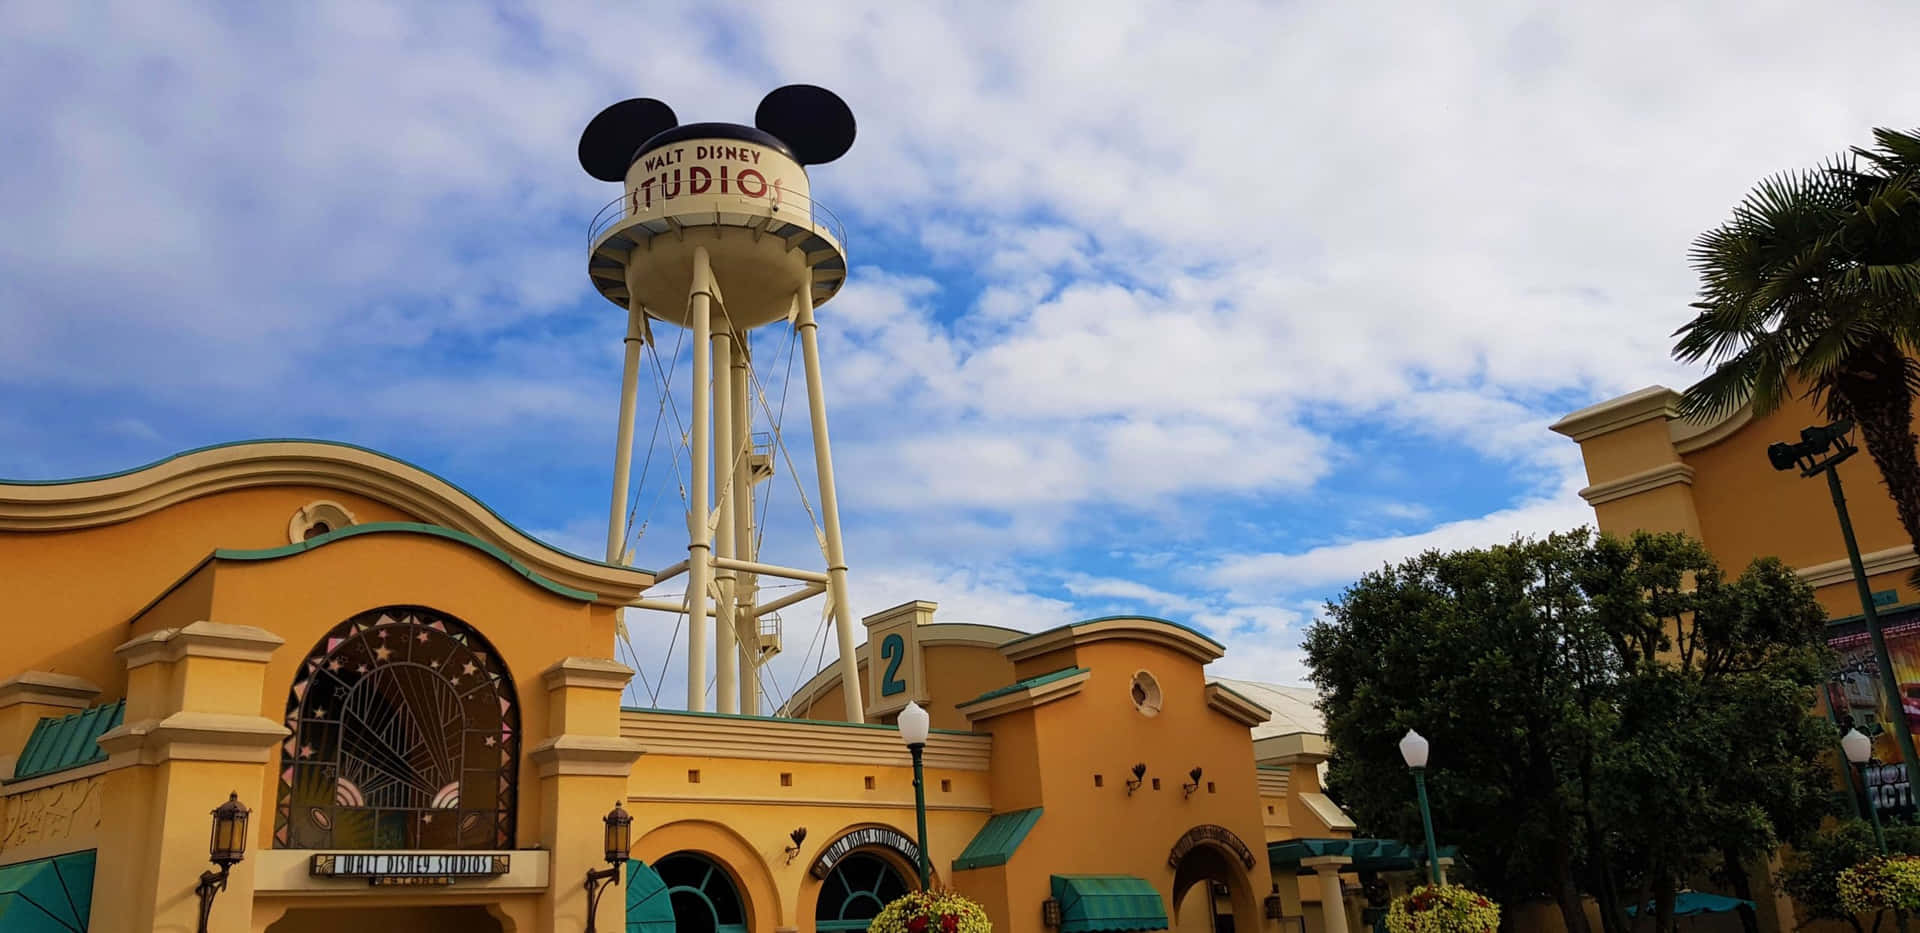 Enter a world of fantasy and adventure with Walt Disney Studios Motion Pictures